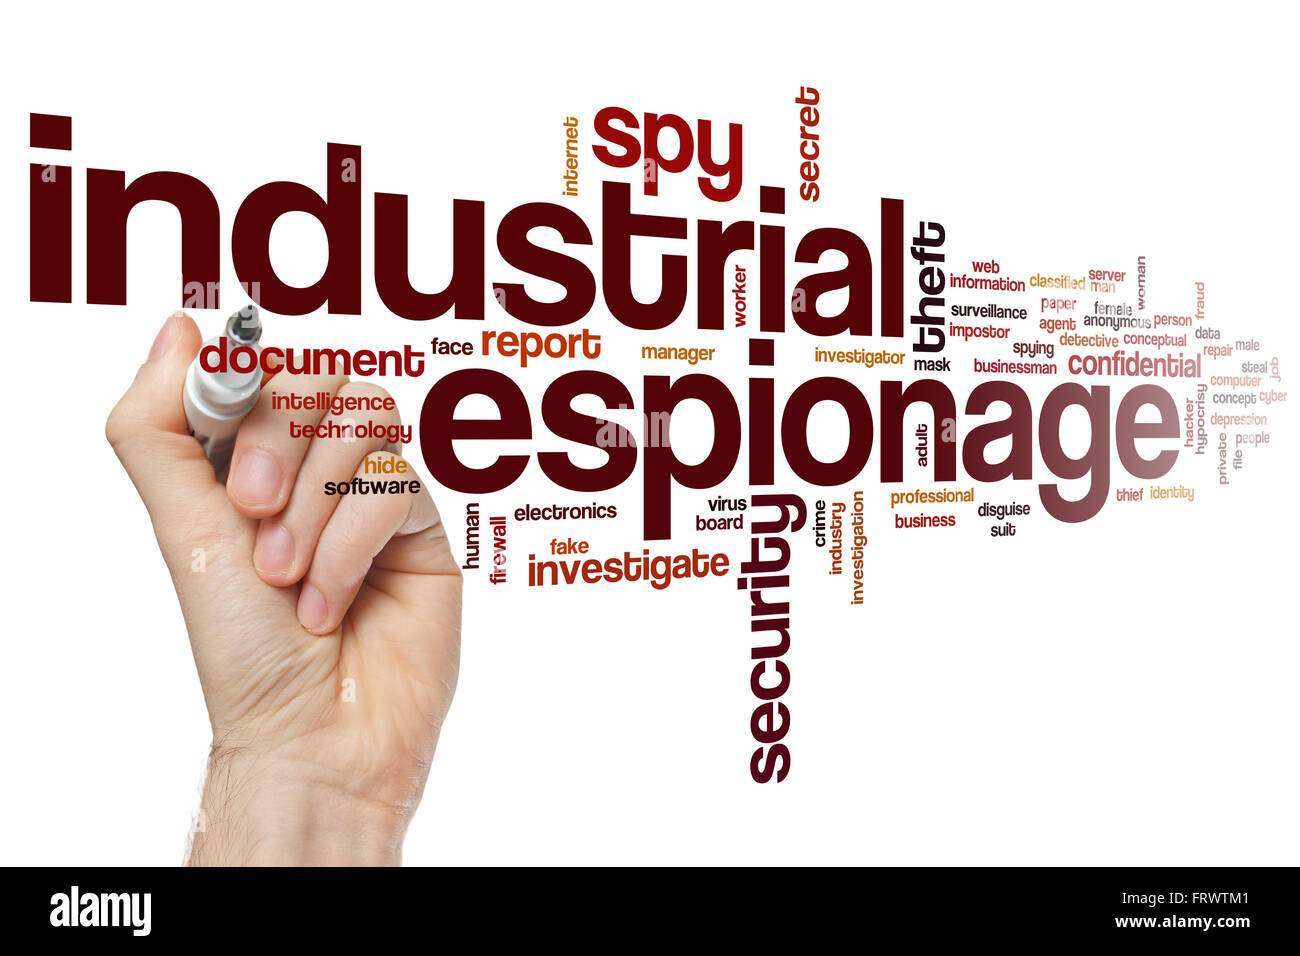 Industrial espionage word cloud concept with security theft related tags Stock Photo